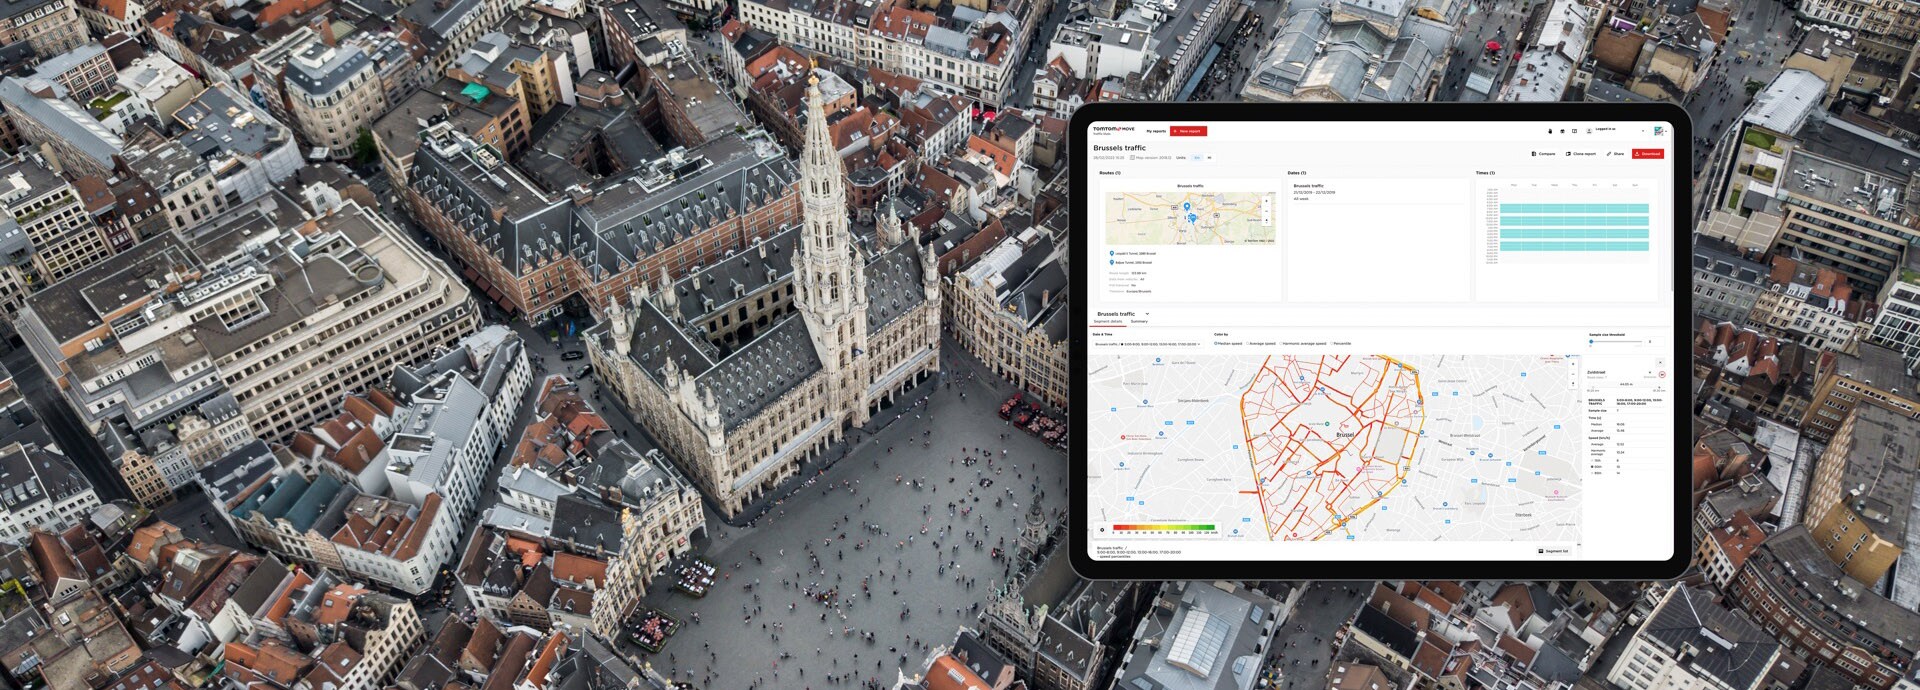 Brussels Mobility and TomTom